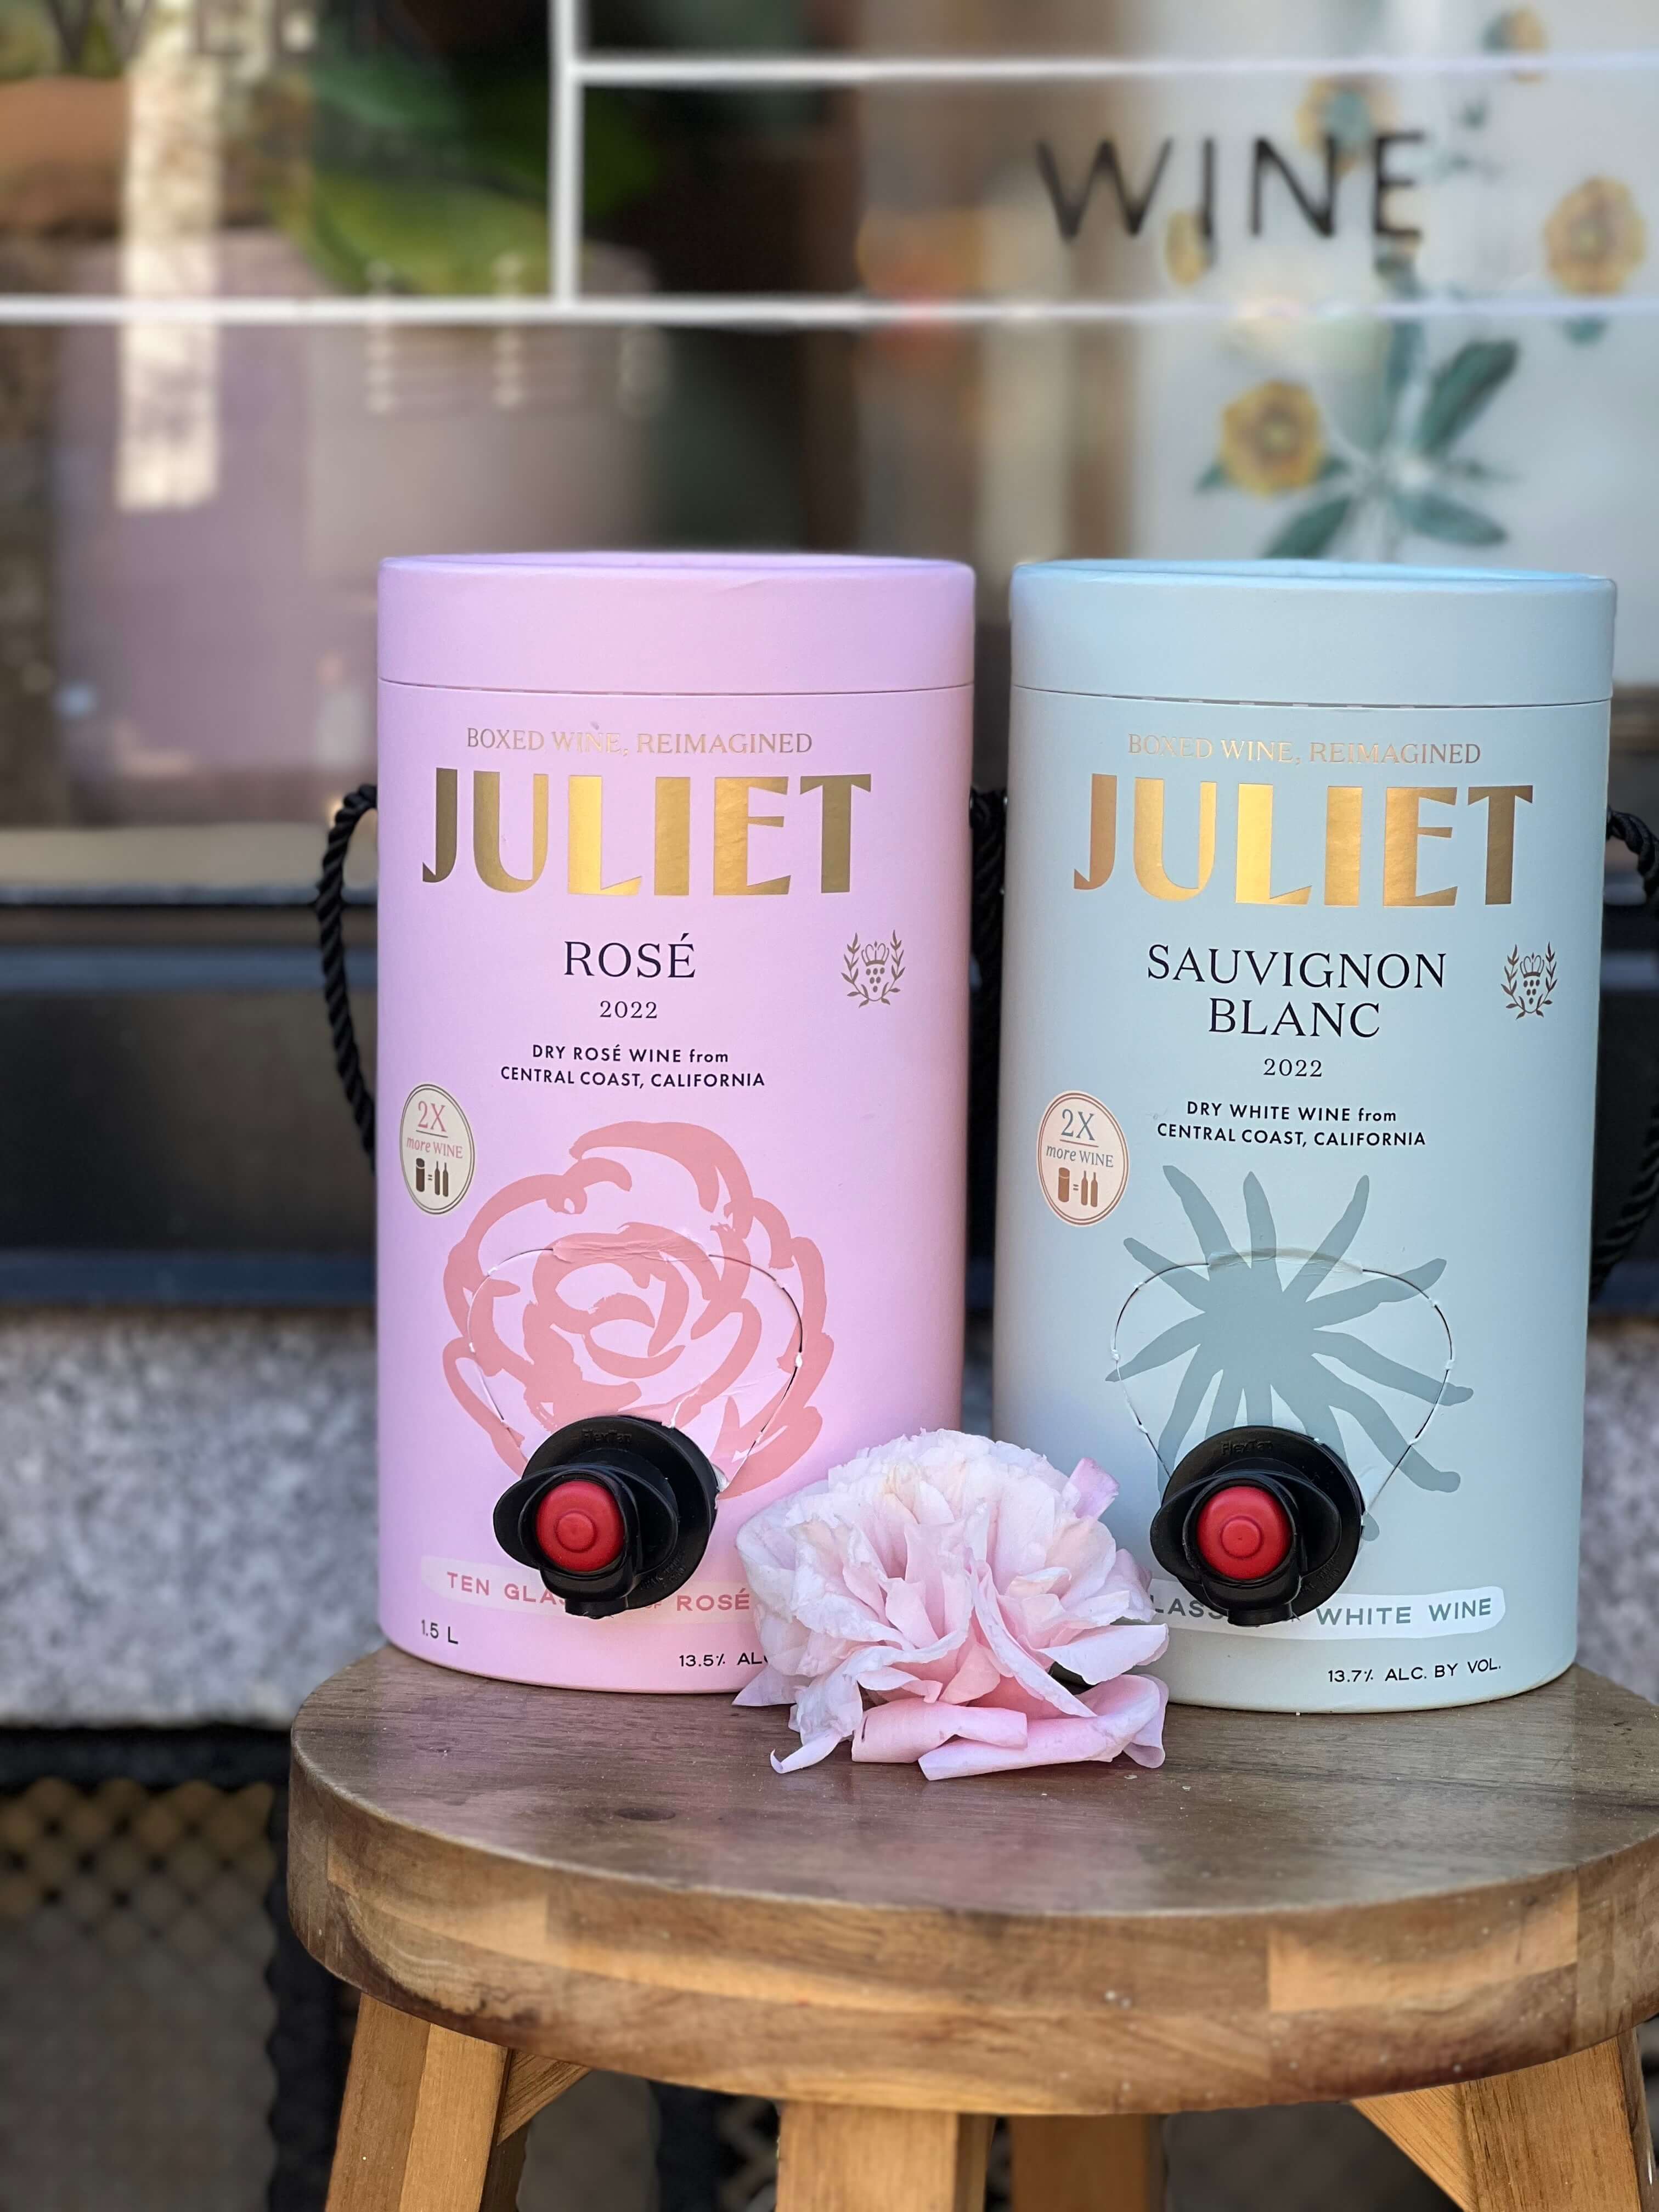 JULIET WINE - Boxed Wine, Reinvented for Luxury